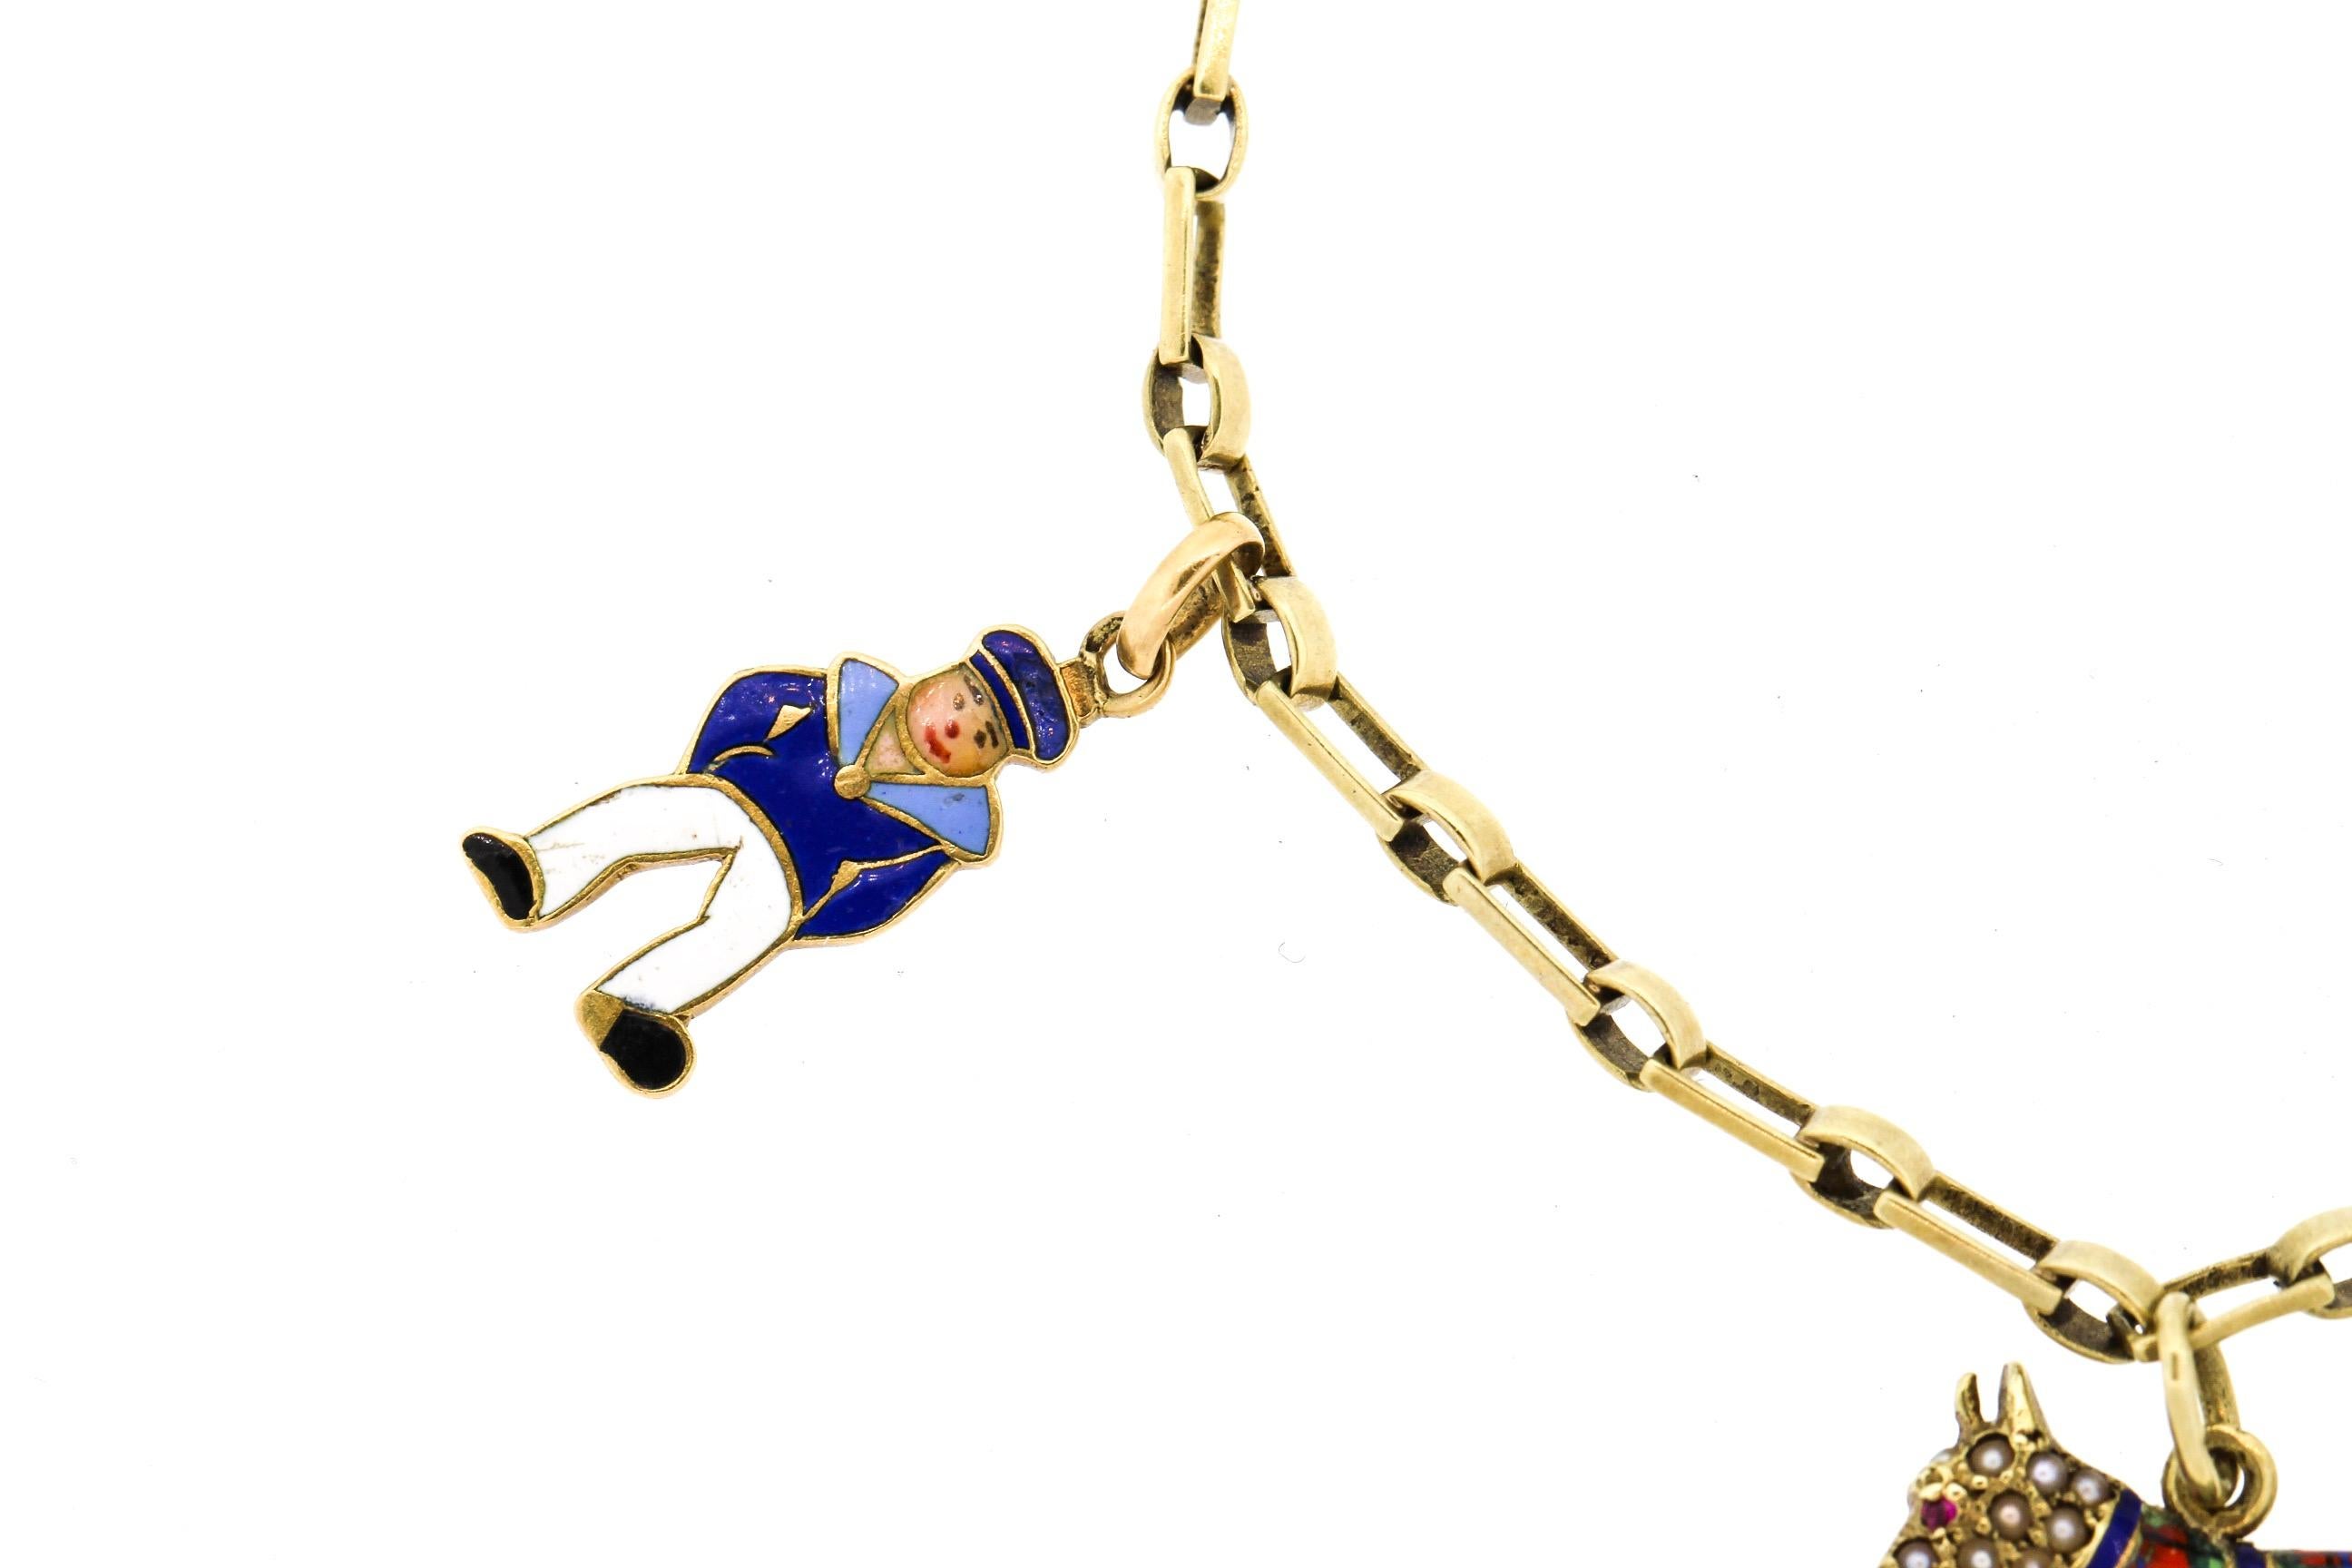 Whimsical vintage 1940s 14k yellow gold enamel charm bracelet. A 14k link bracelet suspends 5 enamel charms. One is an Aquarius zodiac charm, a man dressed like a sailor, and Scottie dog with tartan coat and pearls, a maiden carrying water, and a